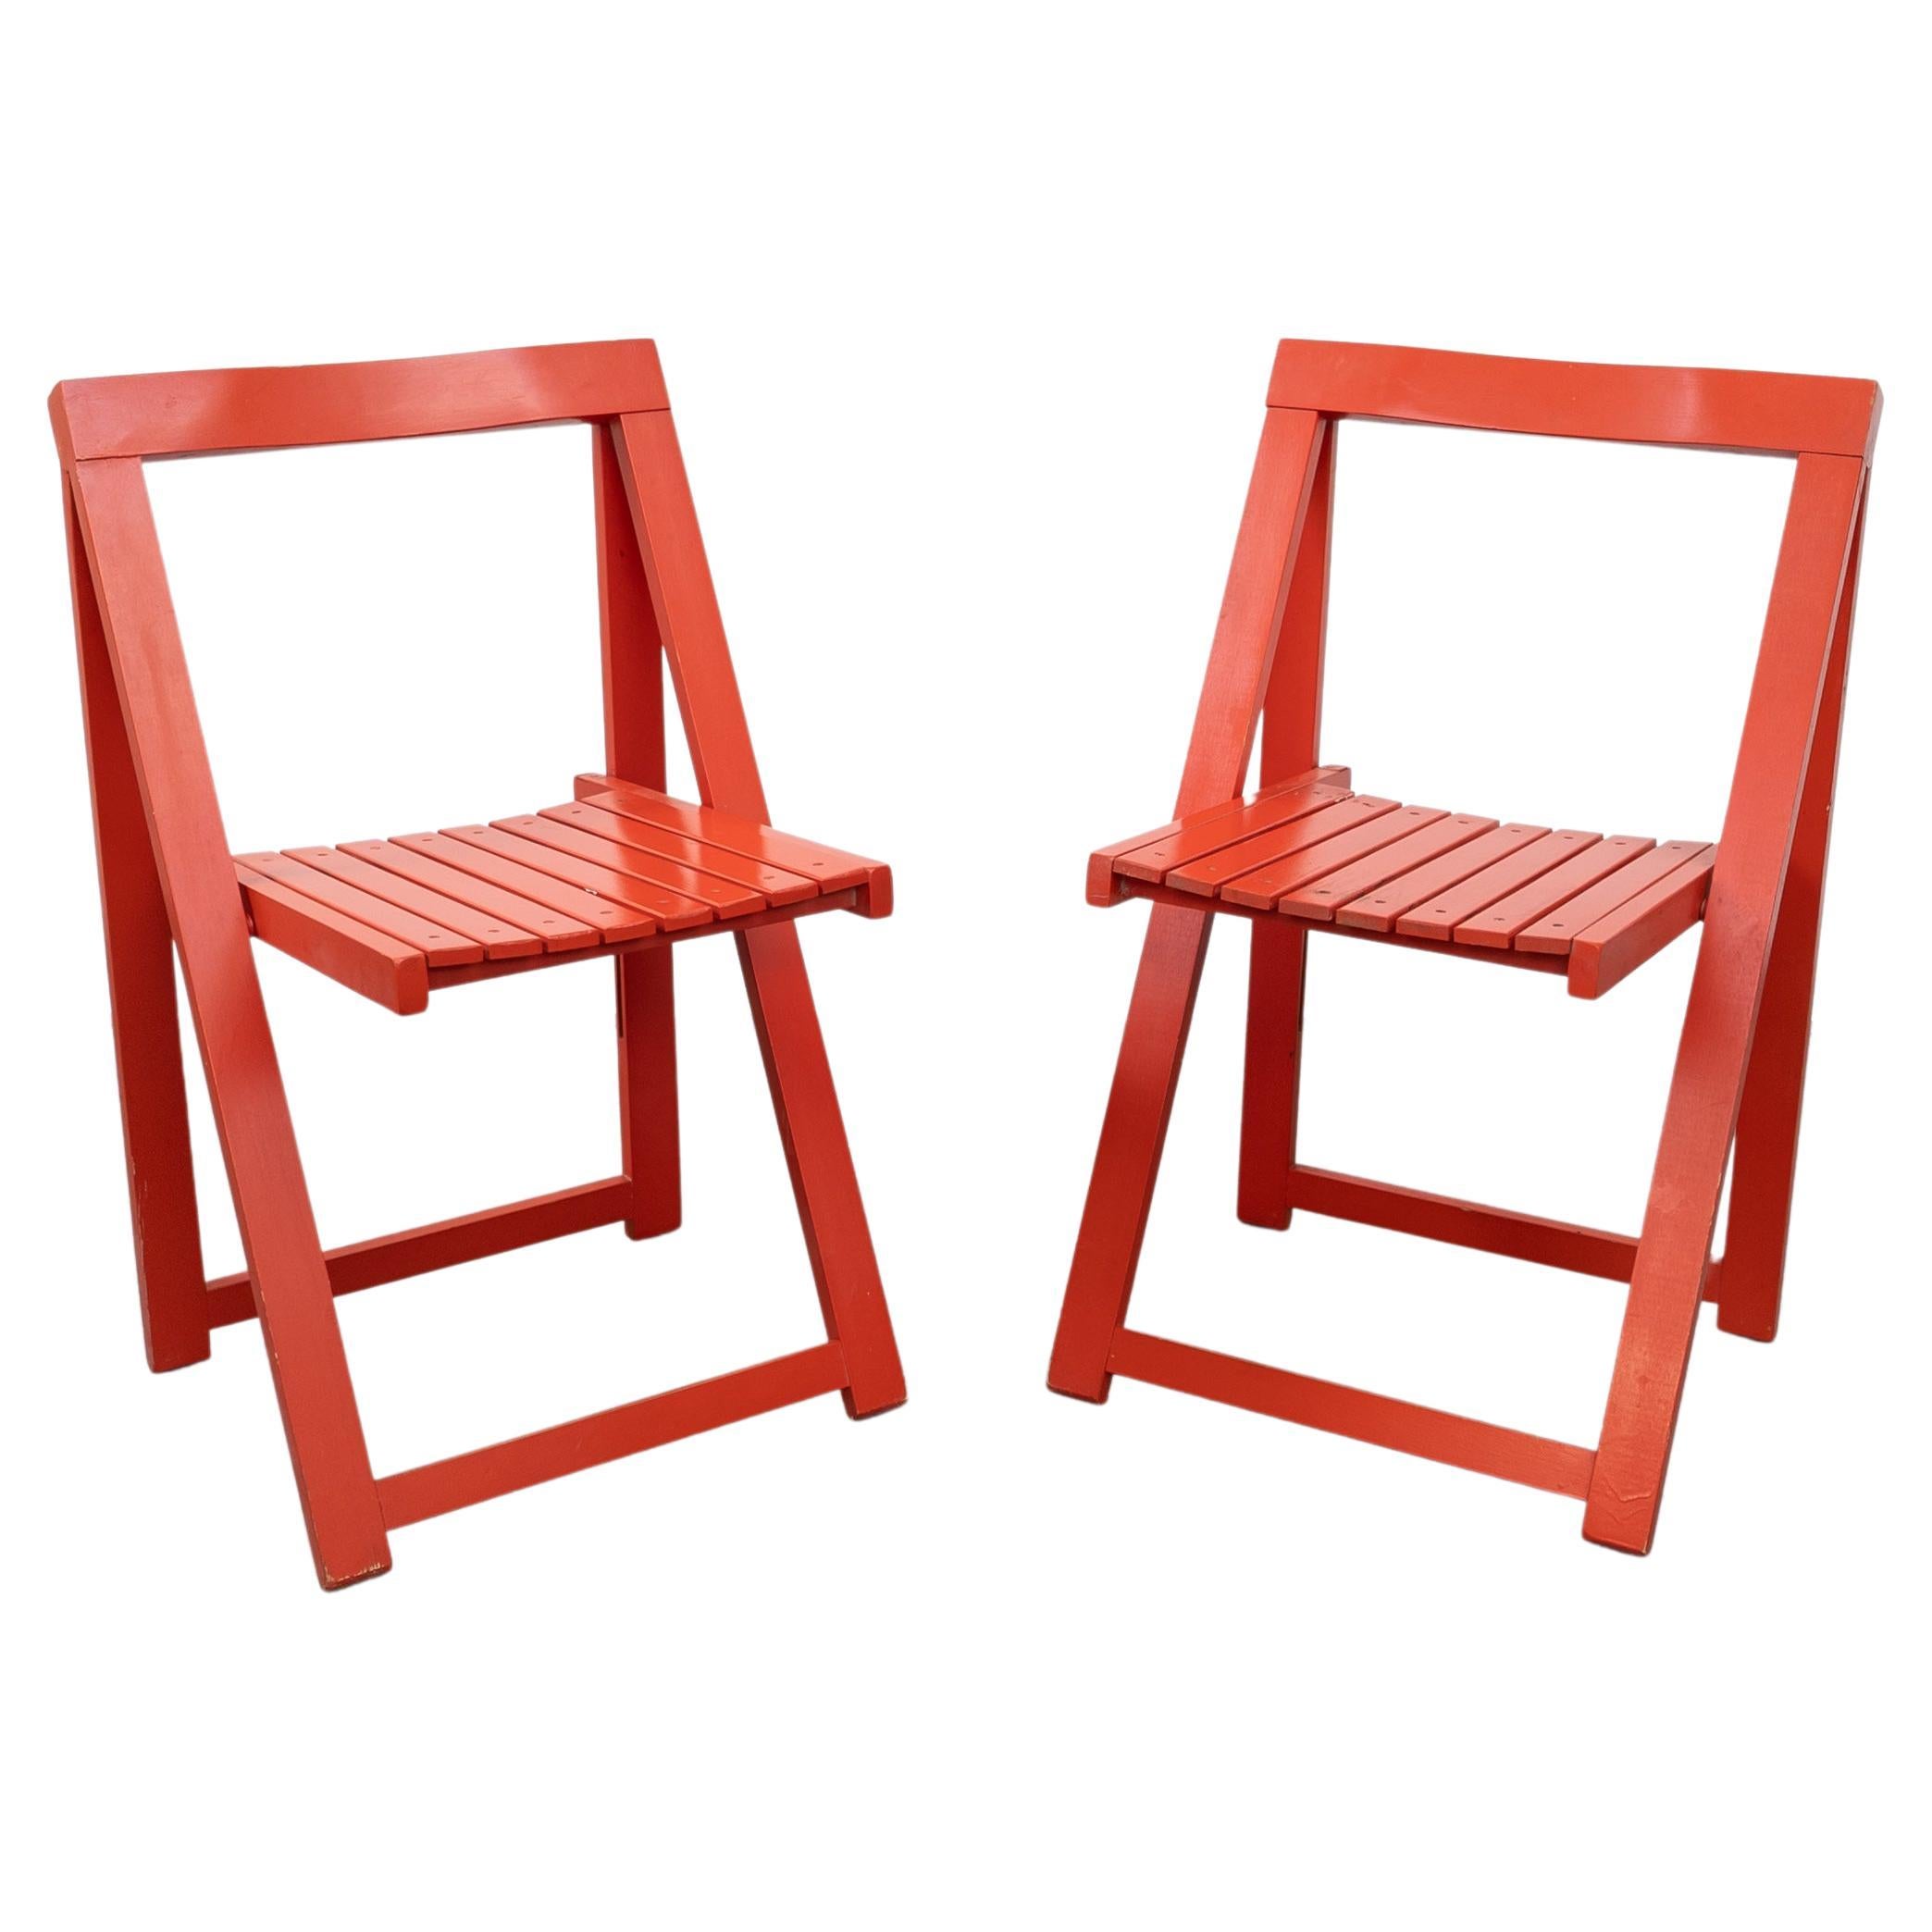 Pair of Vintage Folding Chairs by Aldo Jacober for Alberto Bazzani For Sale